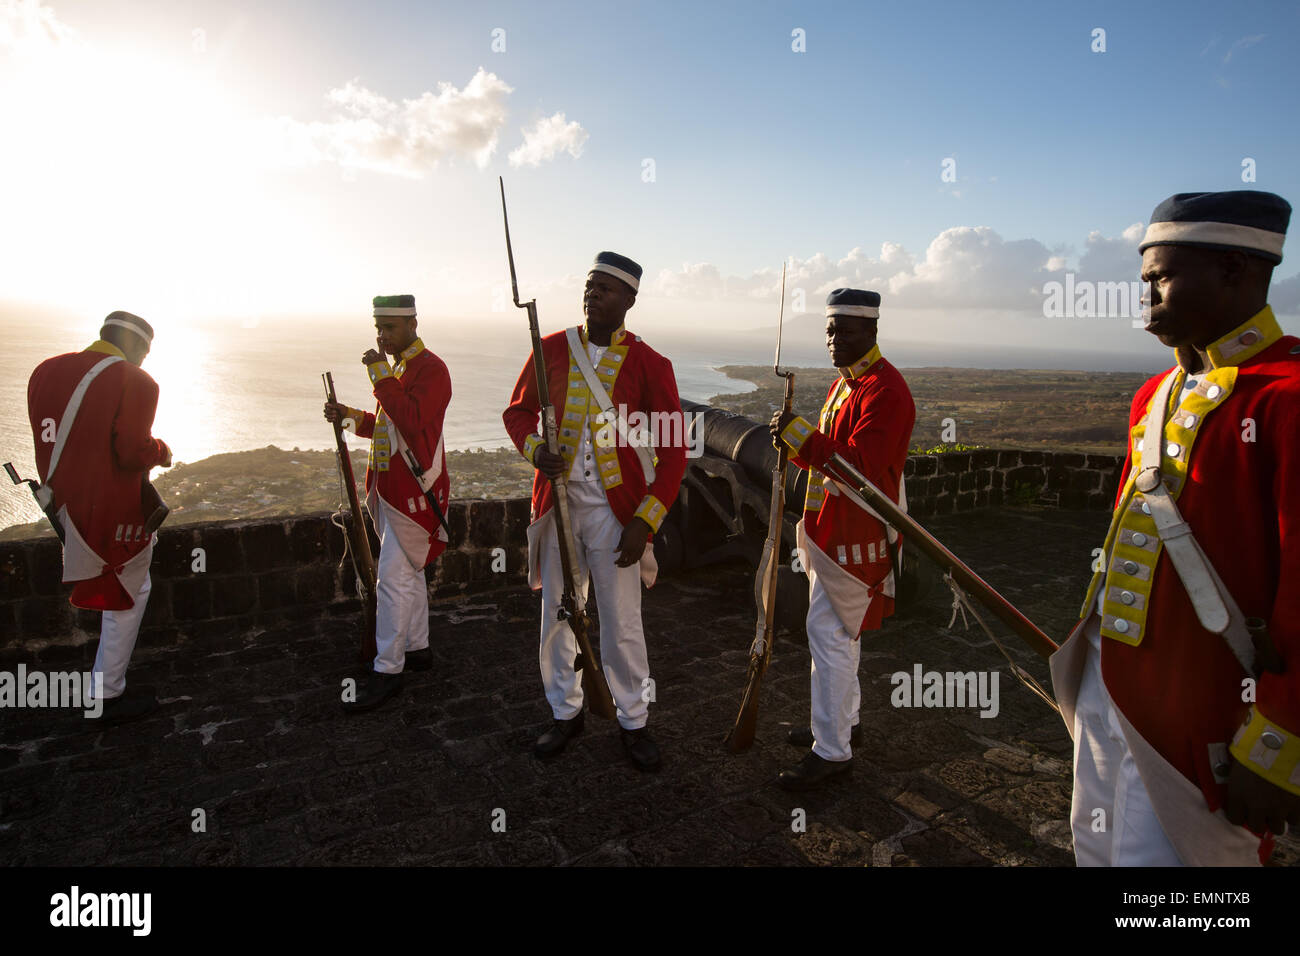 Brimstone Hill Fortress National Park, with soldiers dressed in period costume of West Indies Regiment, in St. Kitts, Caribbean. Stock Photo